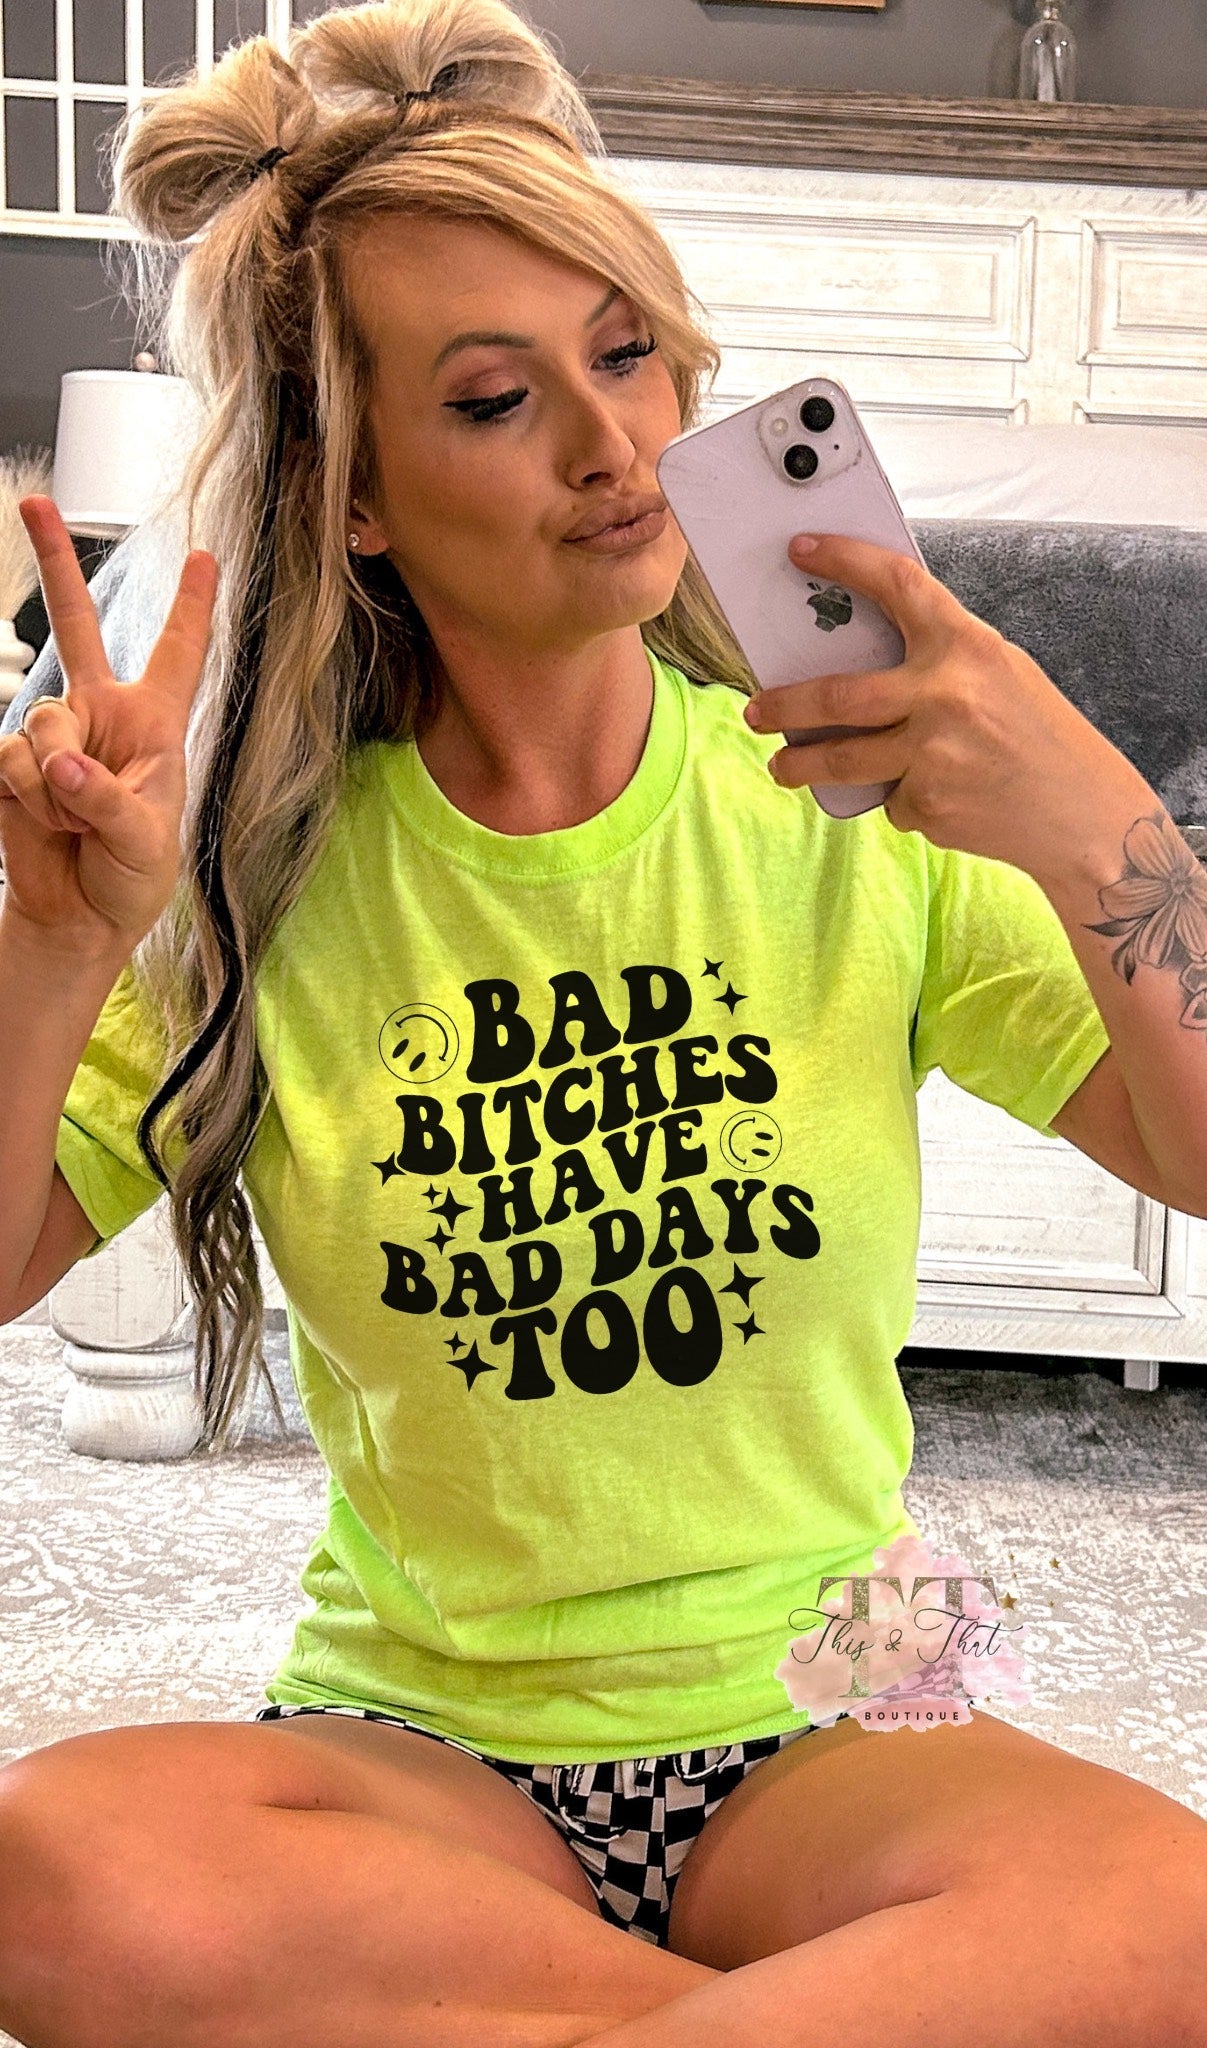 Bad Bitches Have Bad Days Too on Jerzees Neon Green